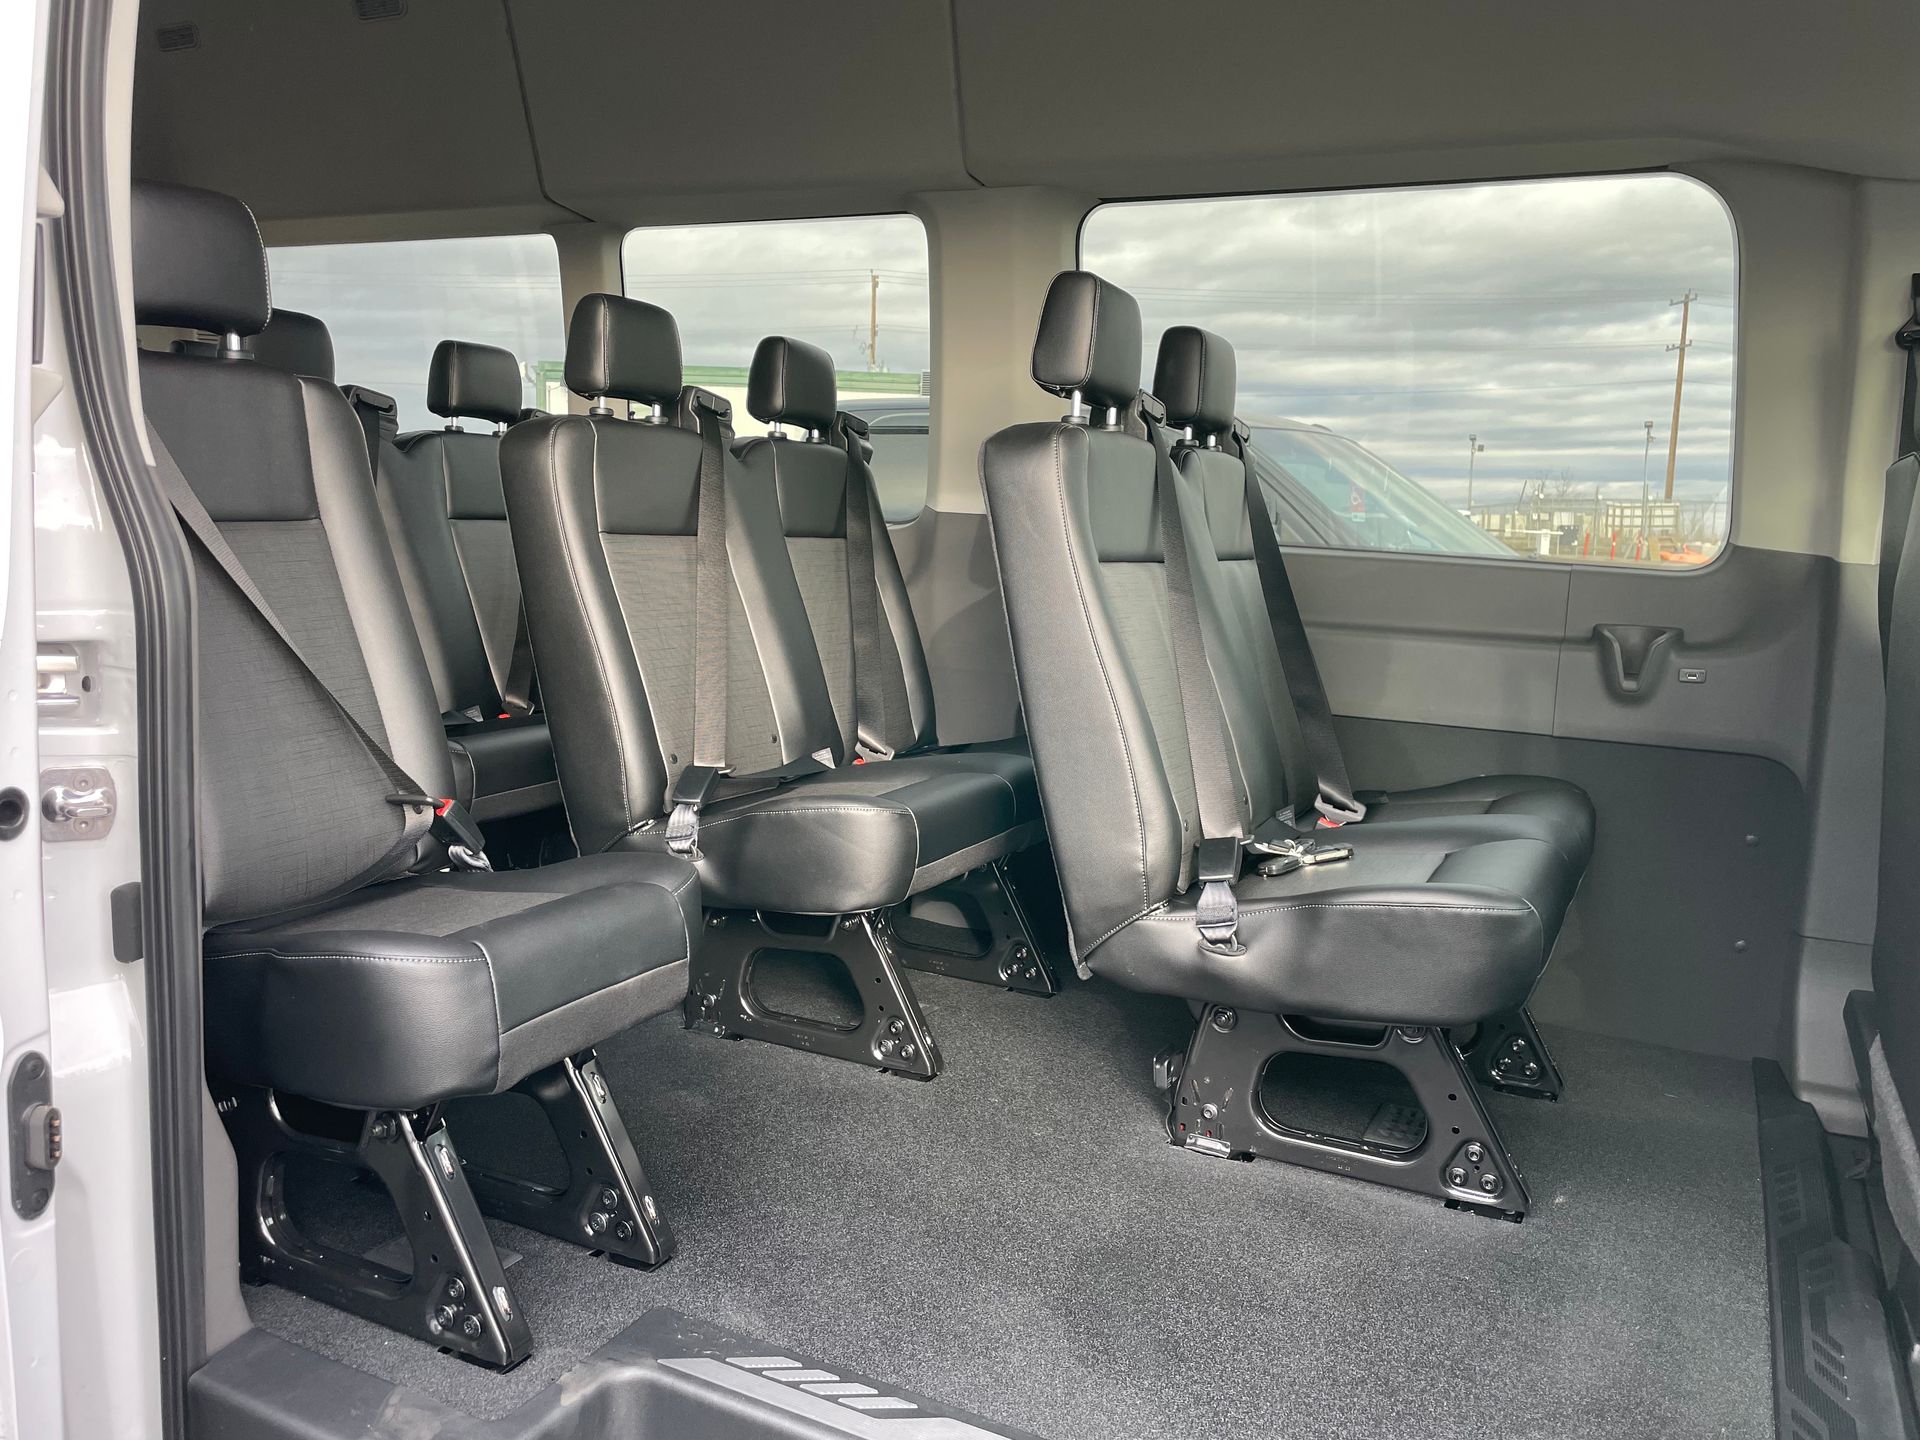 transit-shuttle-bus-passenger-side-entry-with-leather-seats